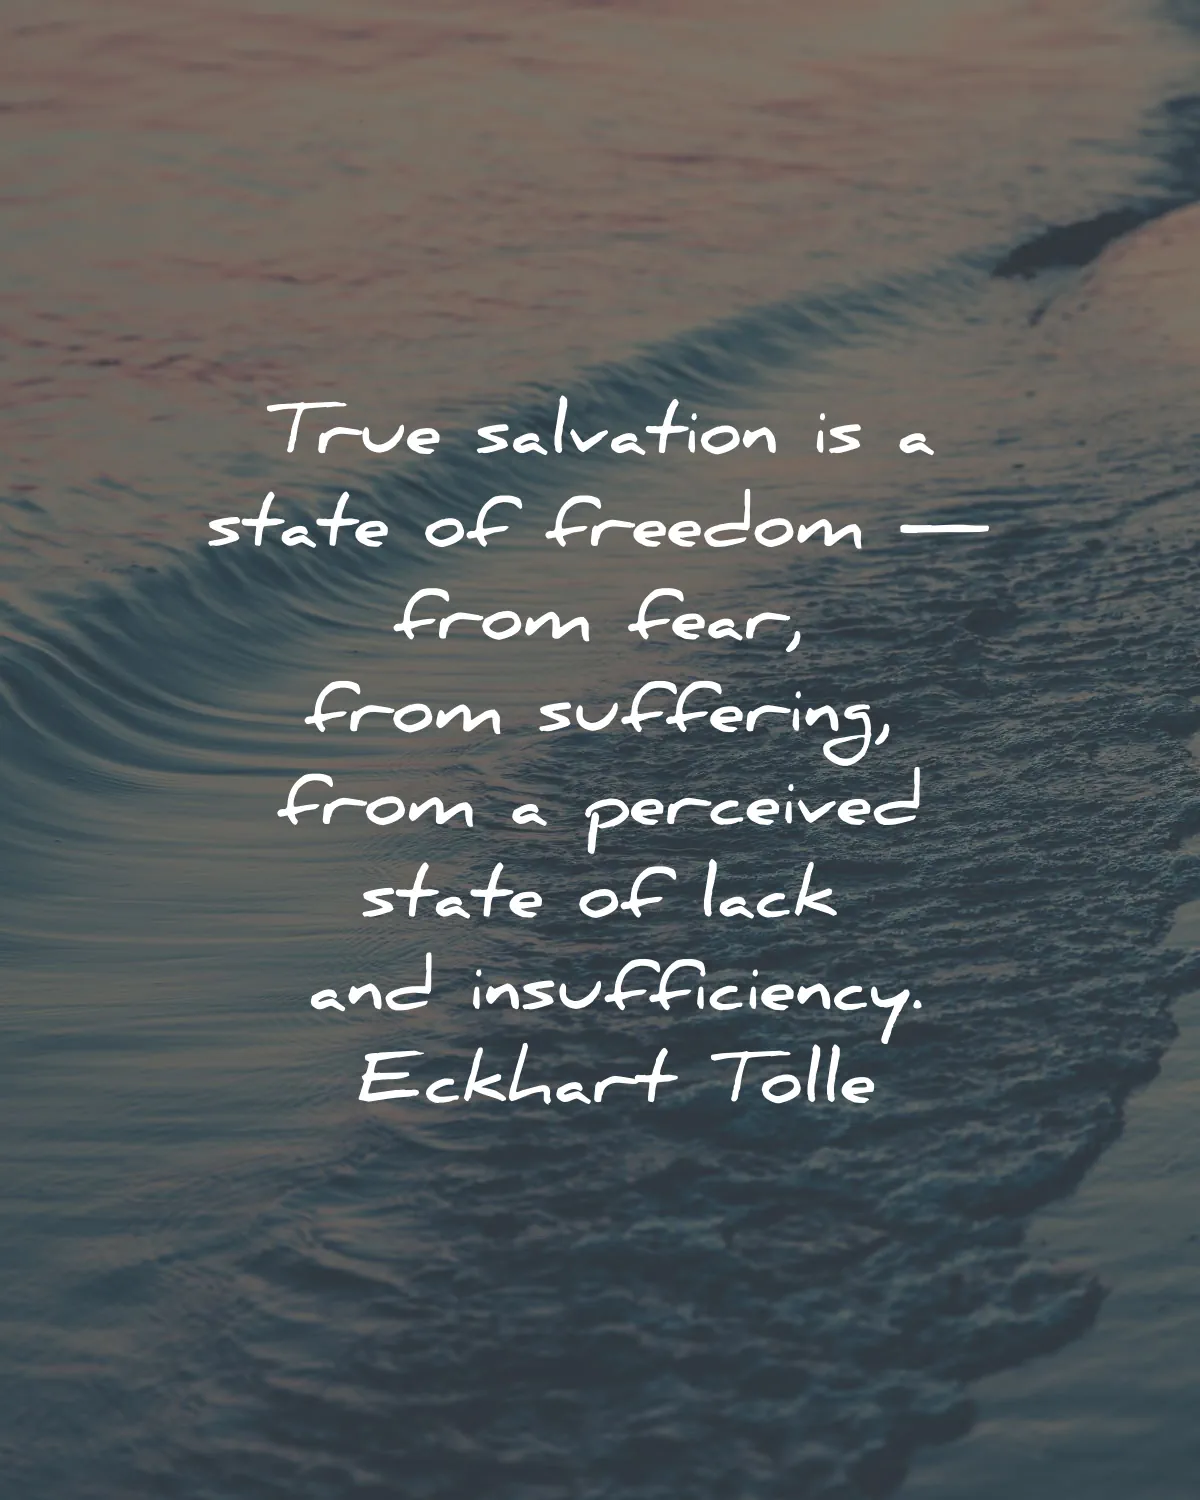 the power of now quotes summary eckhart tolle salvation freedom fear suffering wisdom